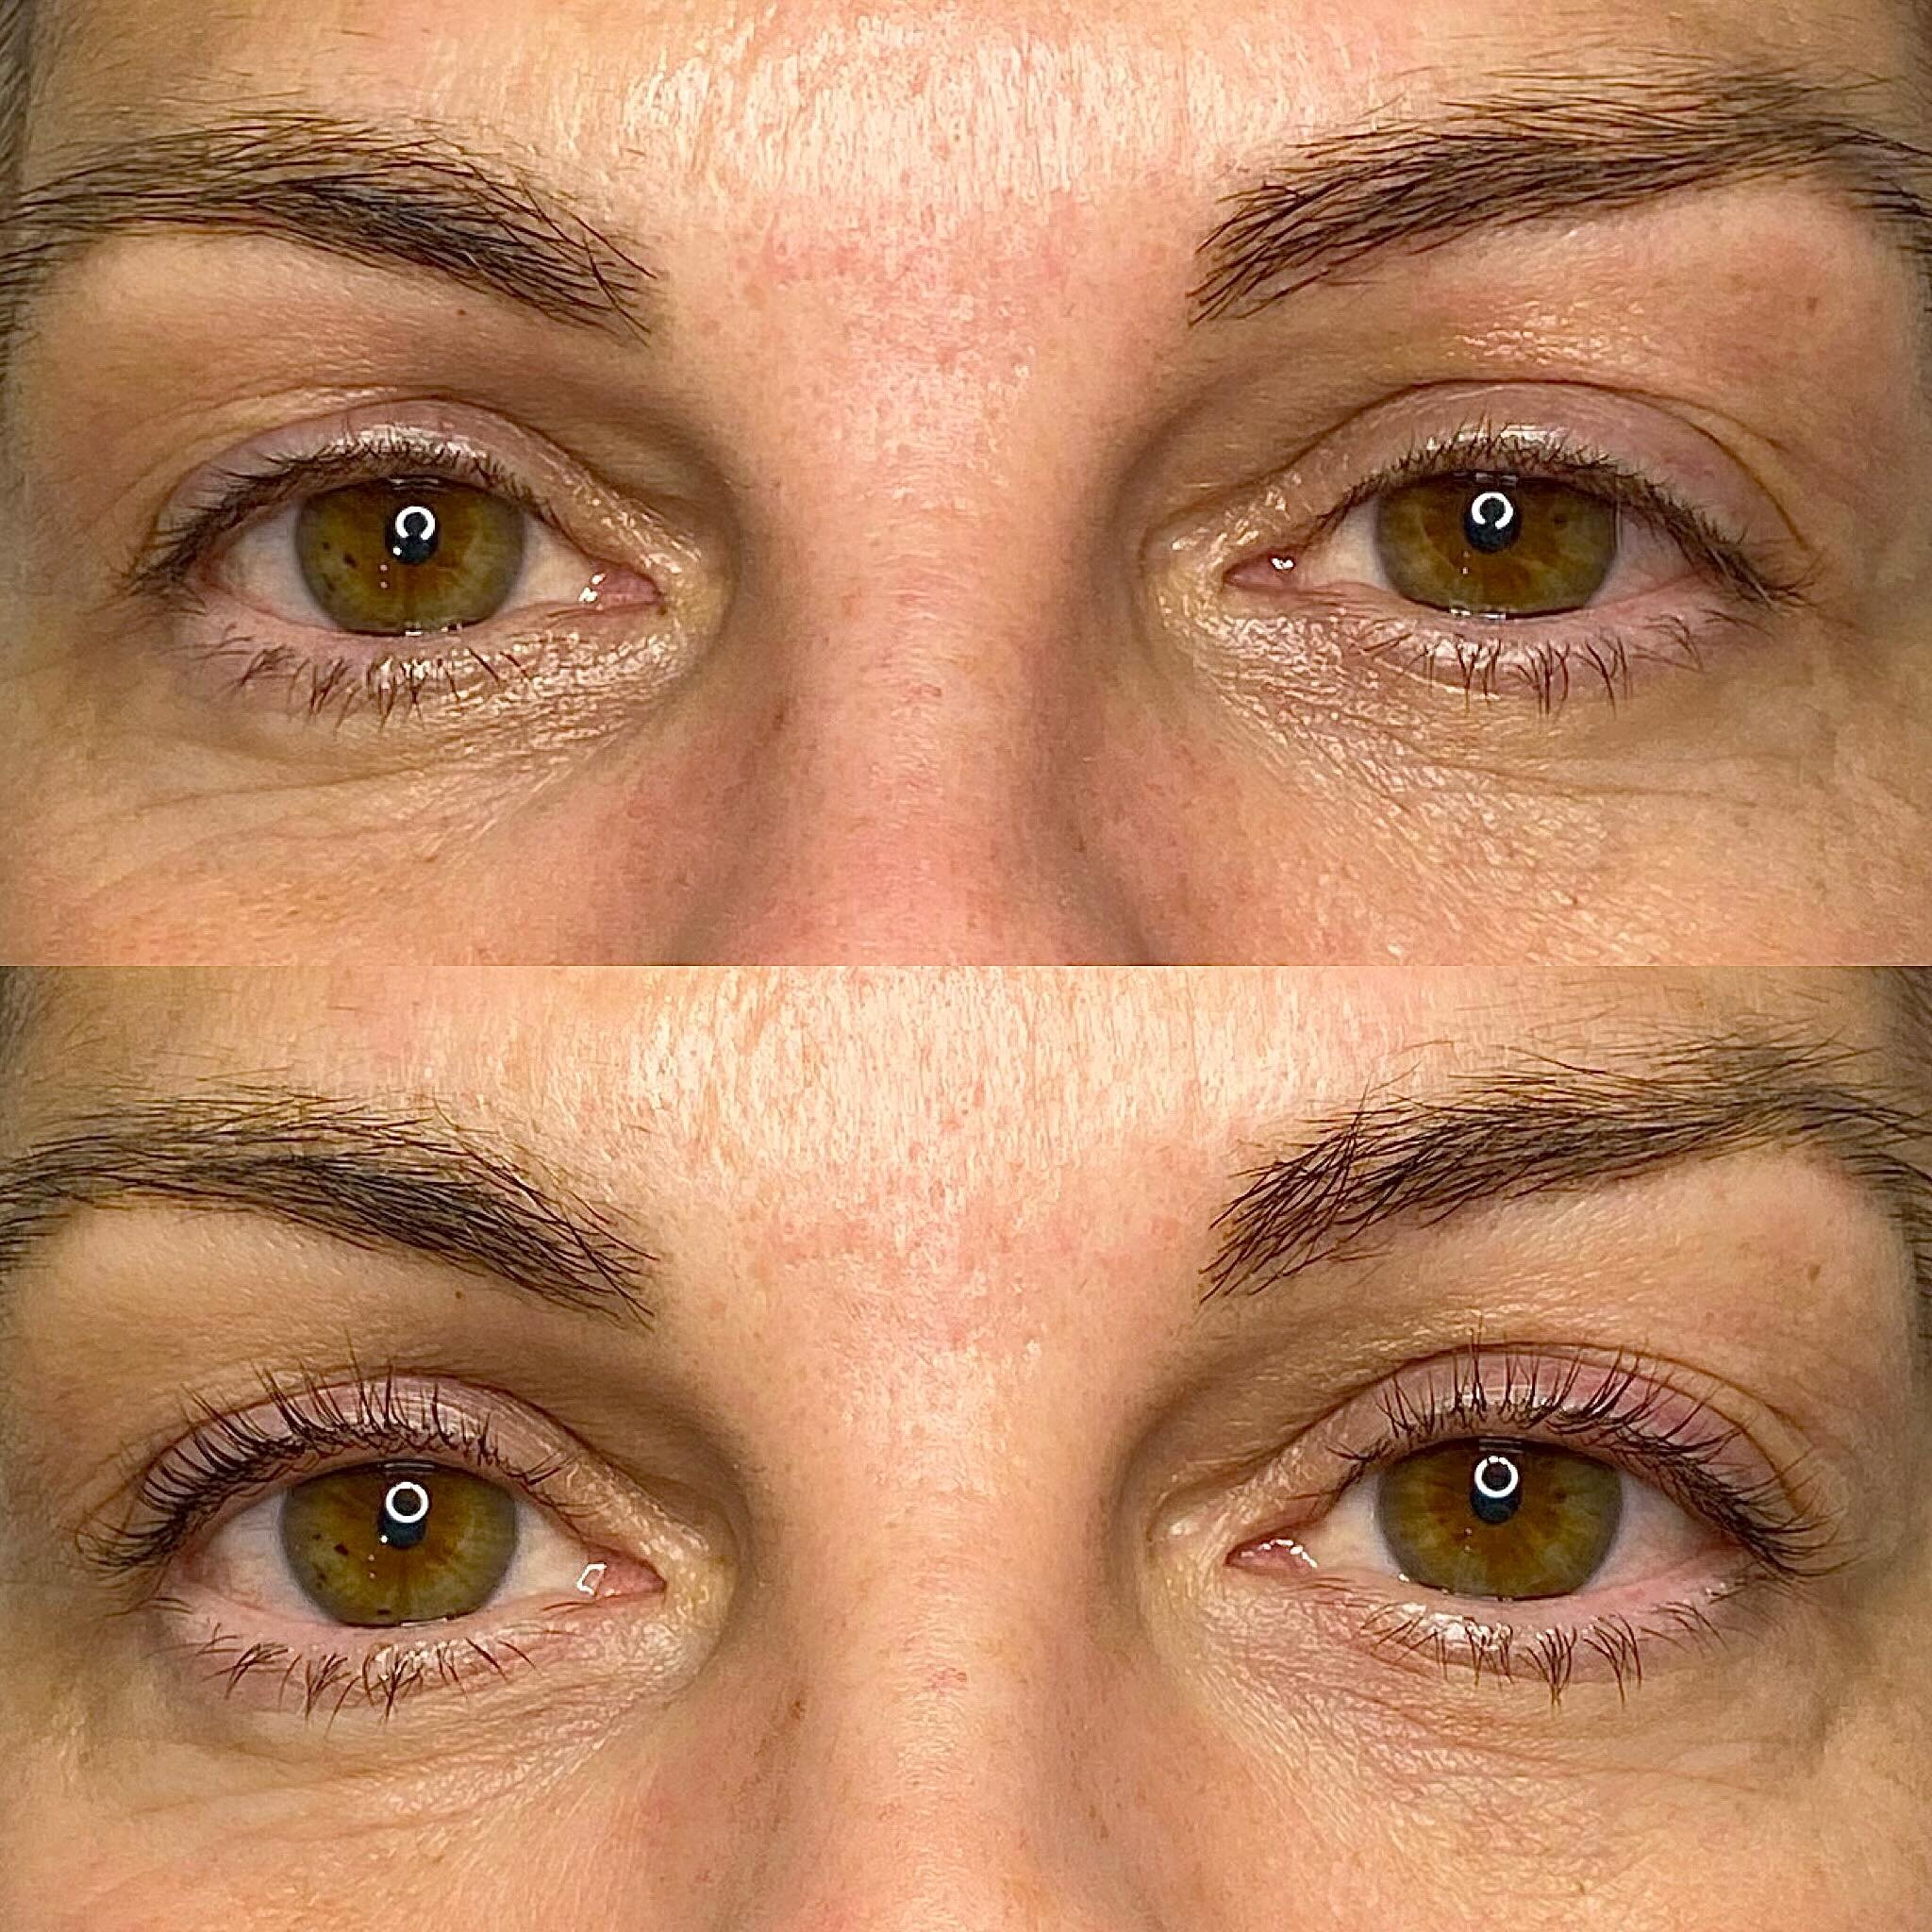 One of my FAVORITE treatments❤️Lash Lift⭐️ Before- lashes are flat, After lashes are lifted and curled opening up the eyes.
⭐️ Lash lifts last approximately 6-8 weeks 
⭐️Require zero maintenance 
⭐️Save on time
⭐️A must for vacation

Get your appoint